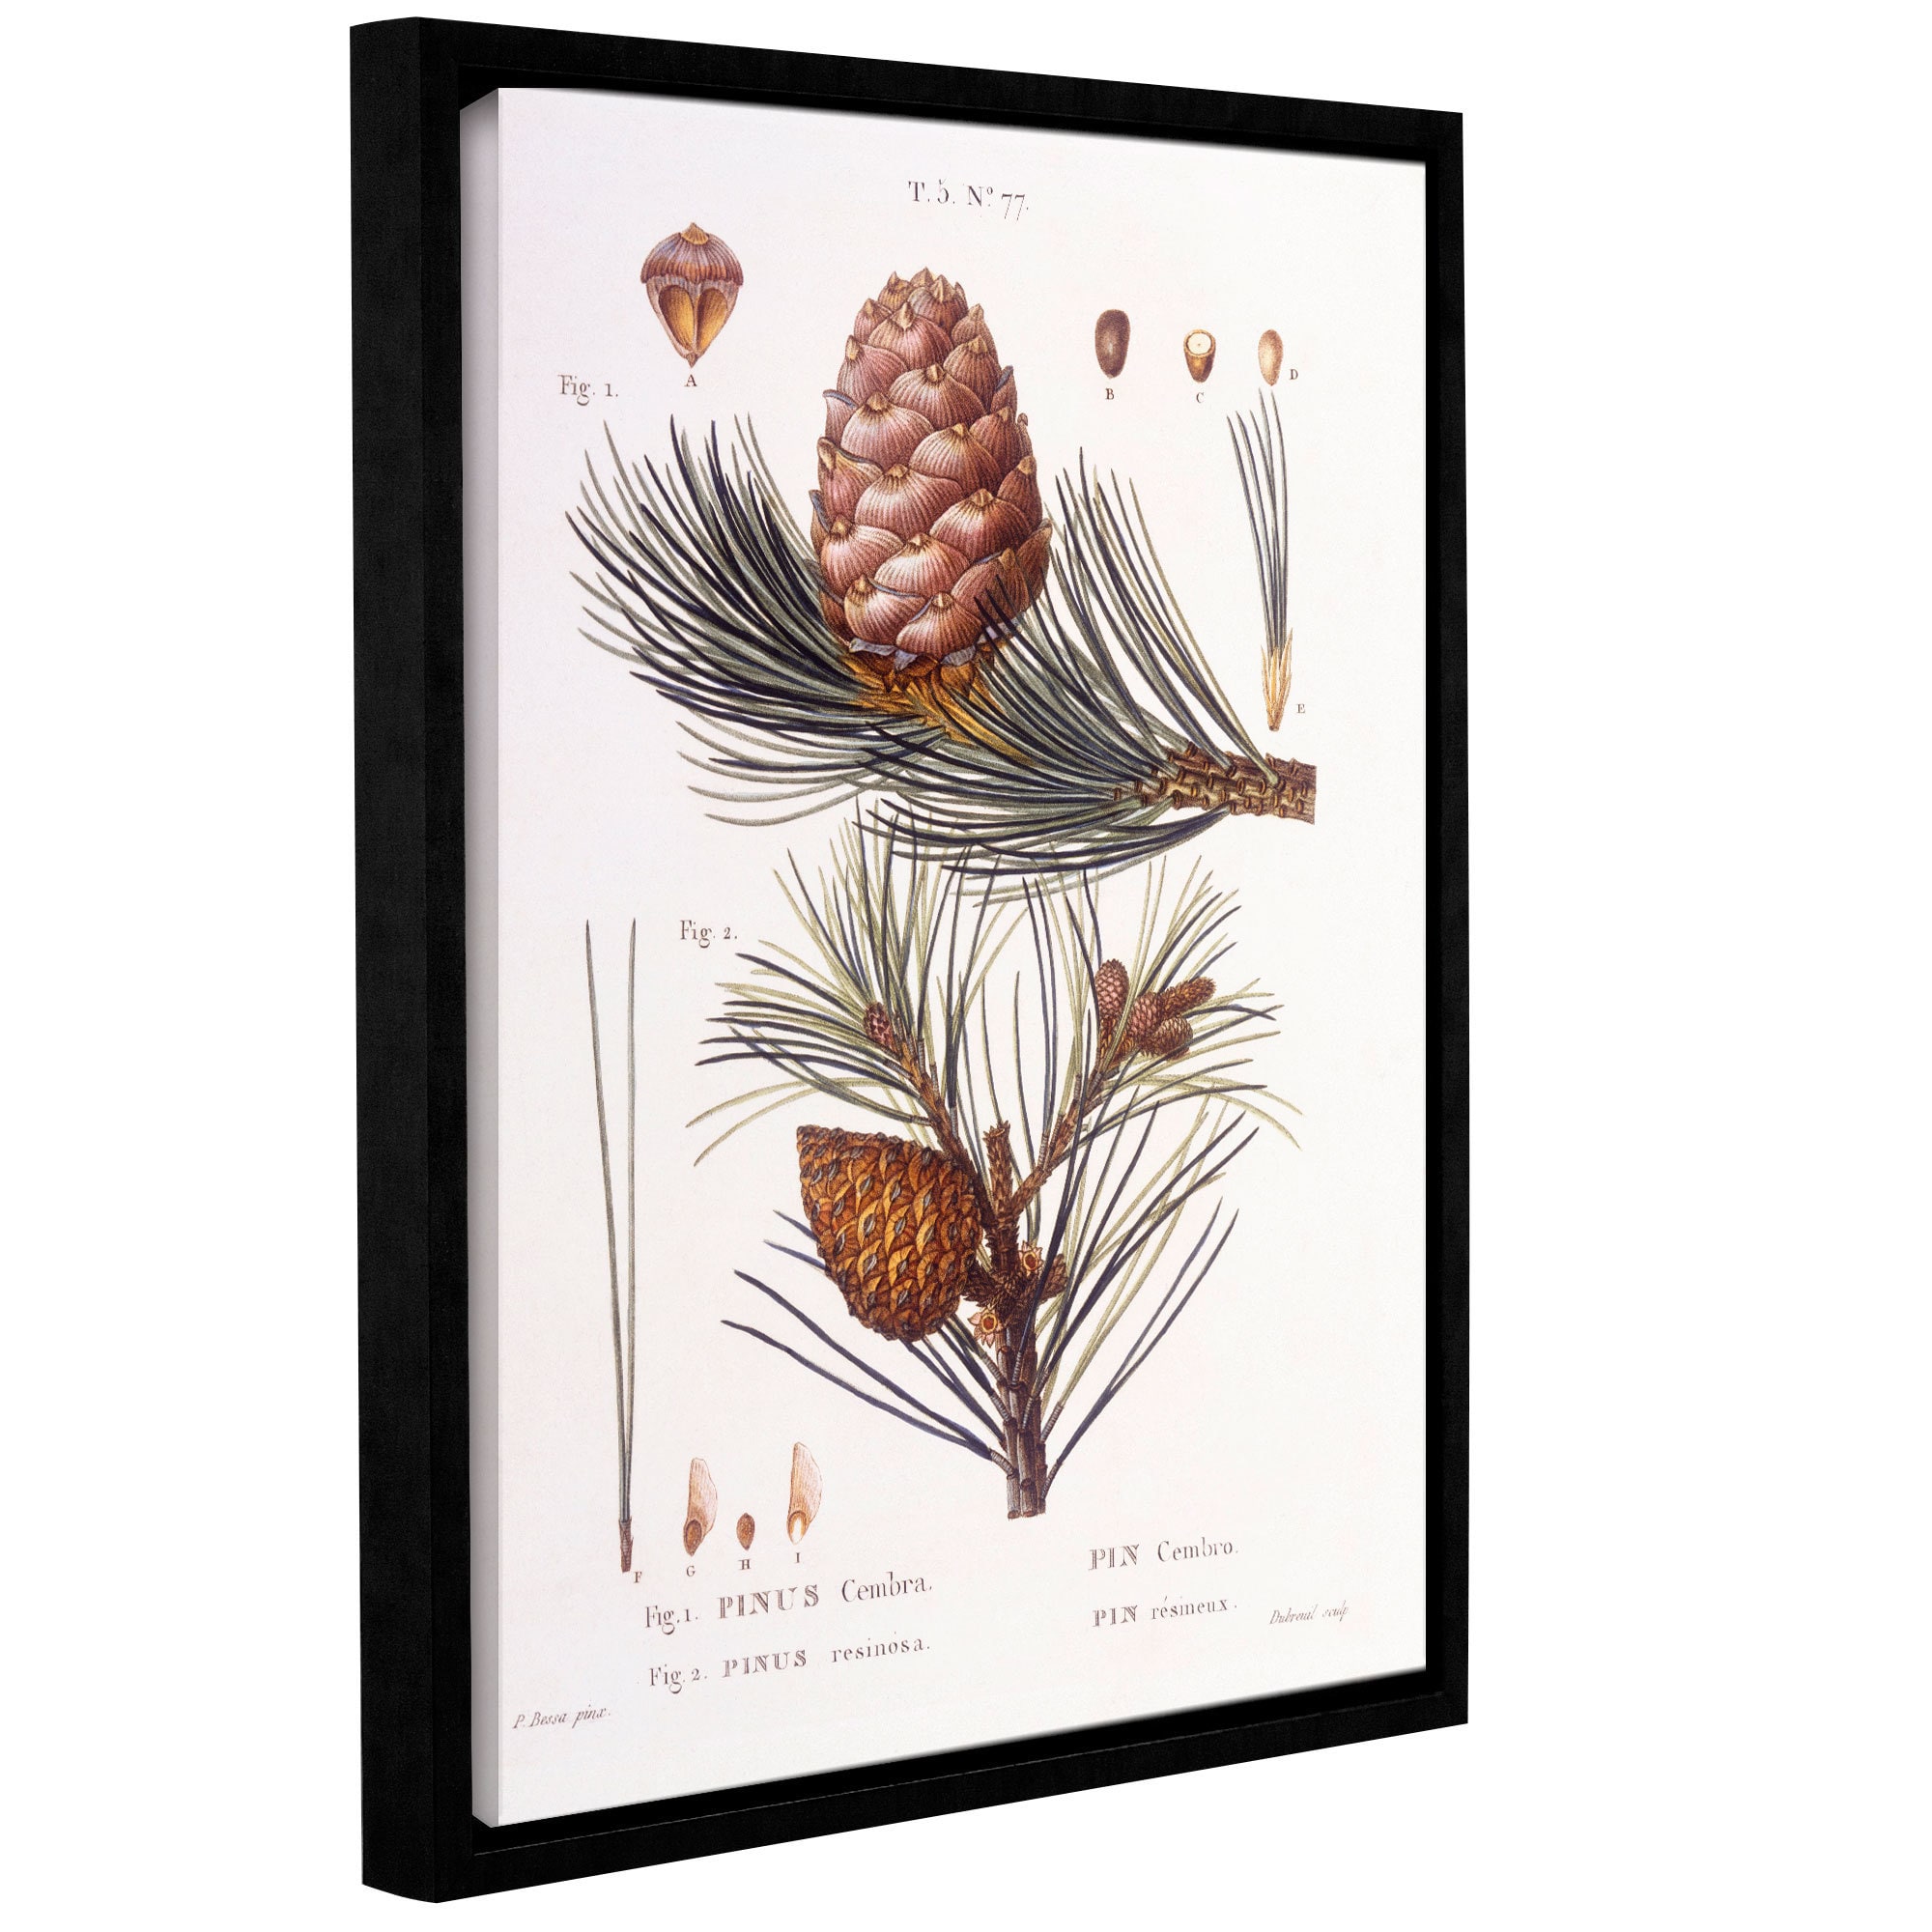 ArtWall Pancrace Bessa's 'Pinus Cembra' Gallery-wrapped Floater-framed Canvas Artwork